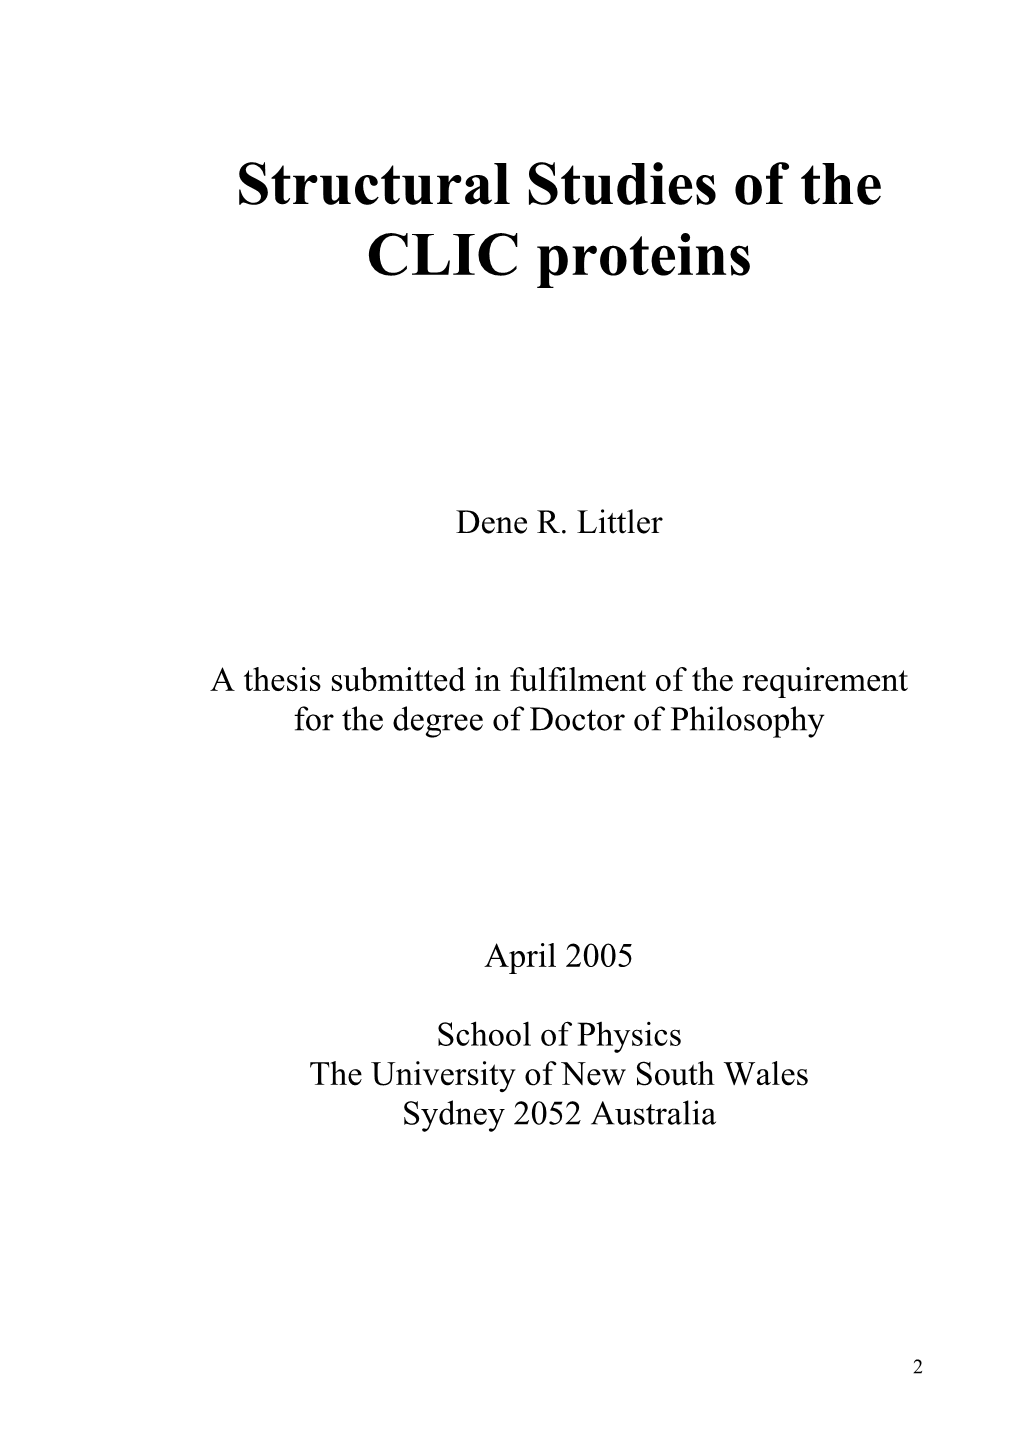 Structural Studies of the CLIC Proteins